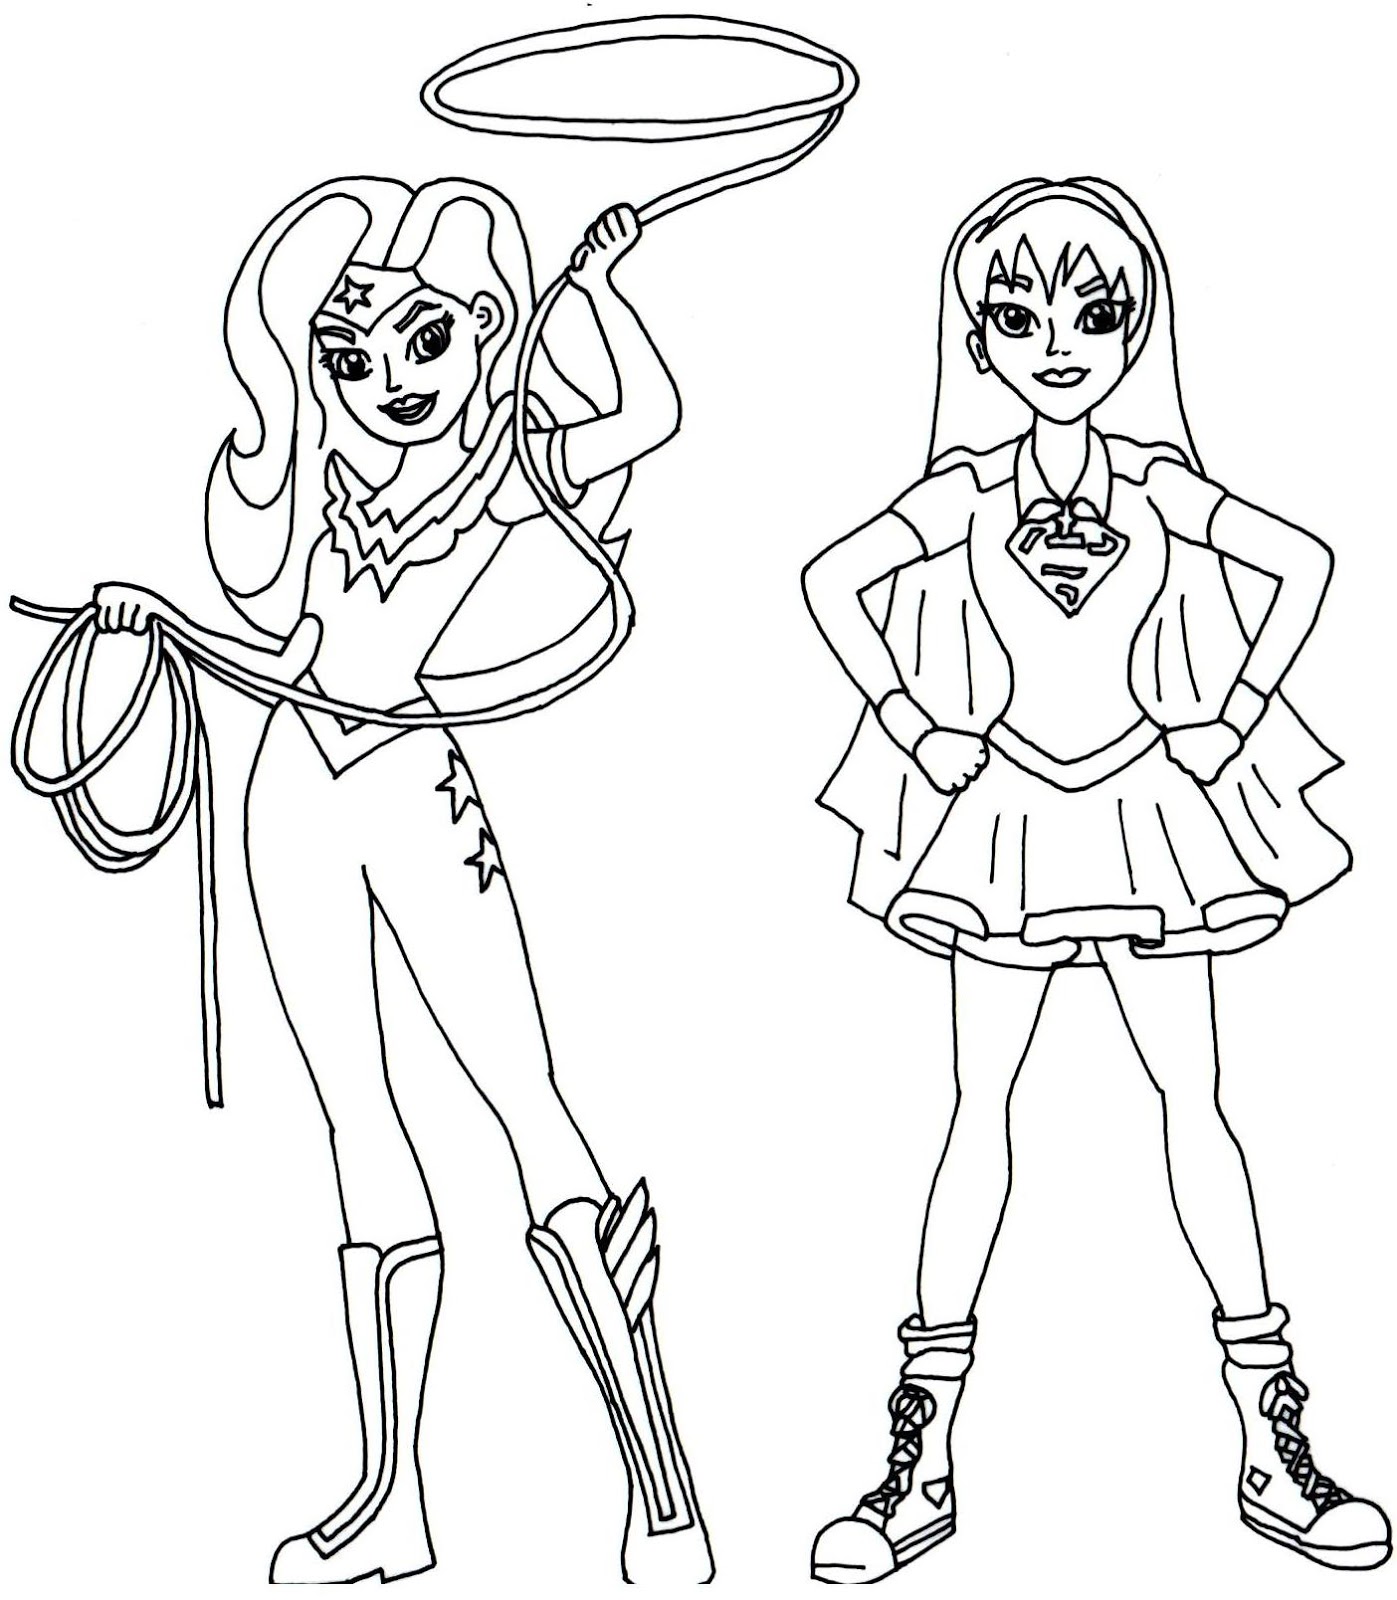 Dc Superhero Girl Coloring Pages at GetColorings.com ...